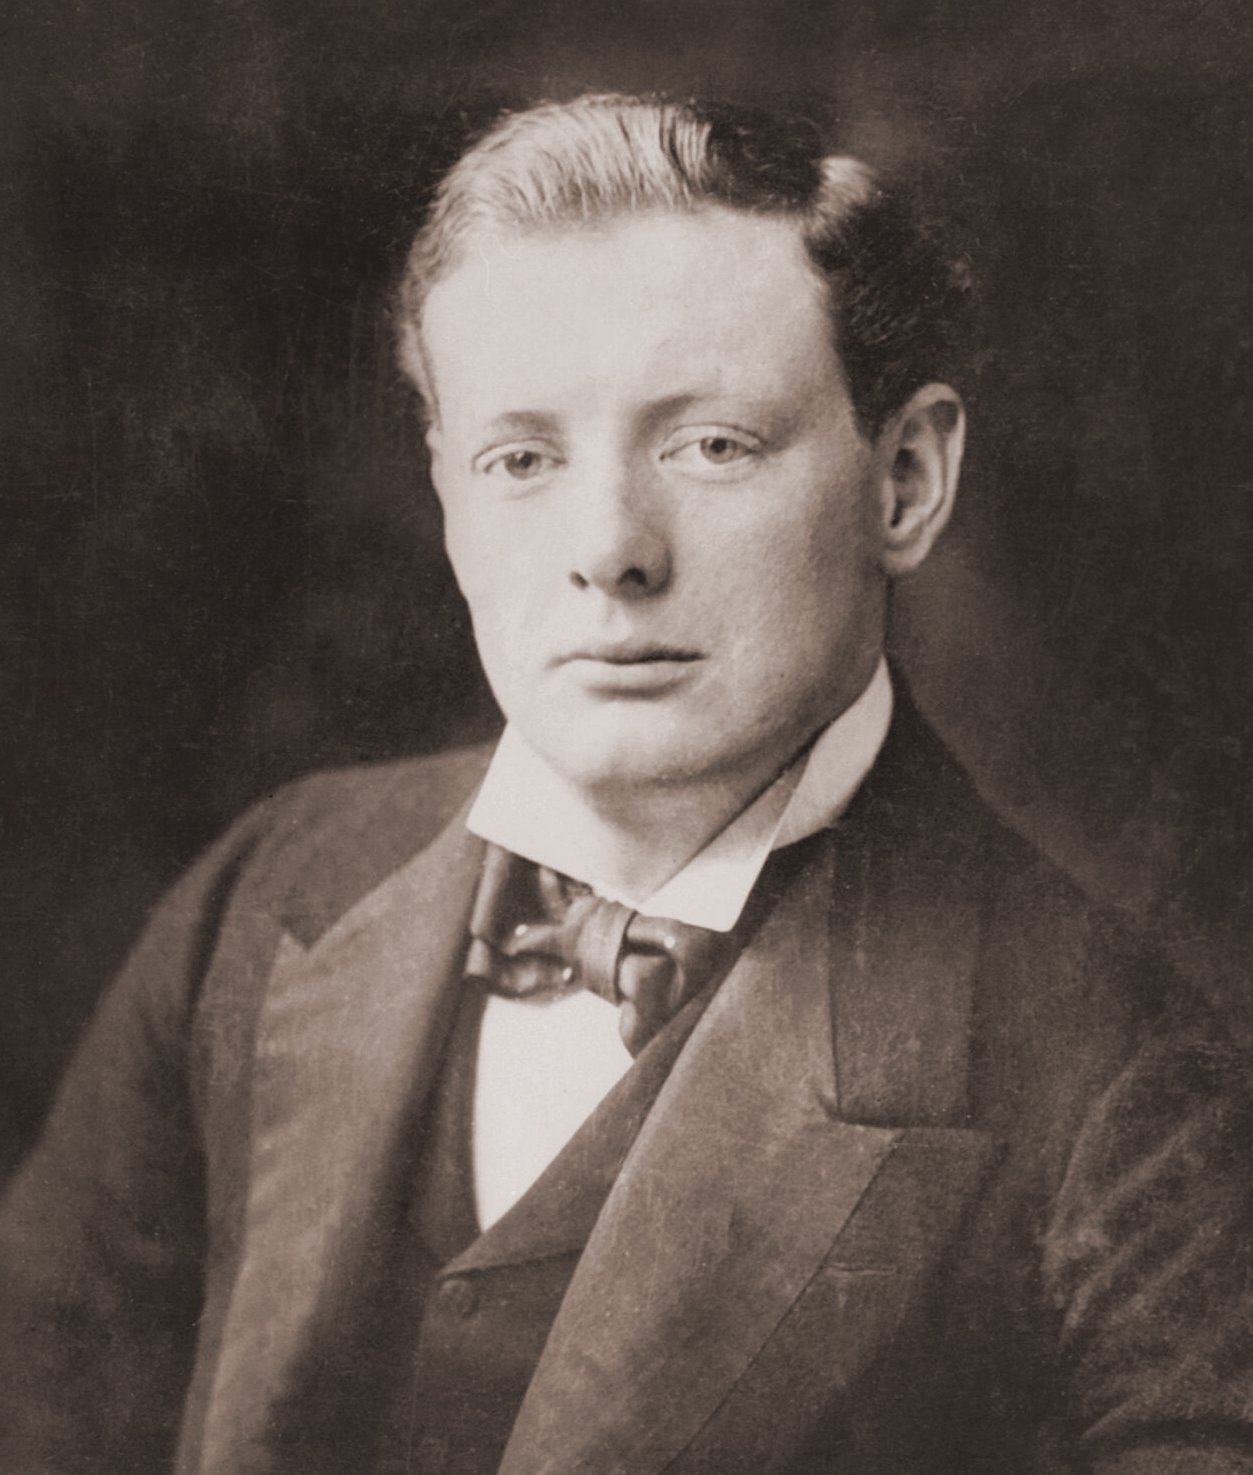 A half-length portrait from 1900 showcasing a young Winston Churchill, dressed in formal attire, exuding confidence and determination.